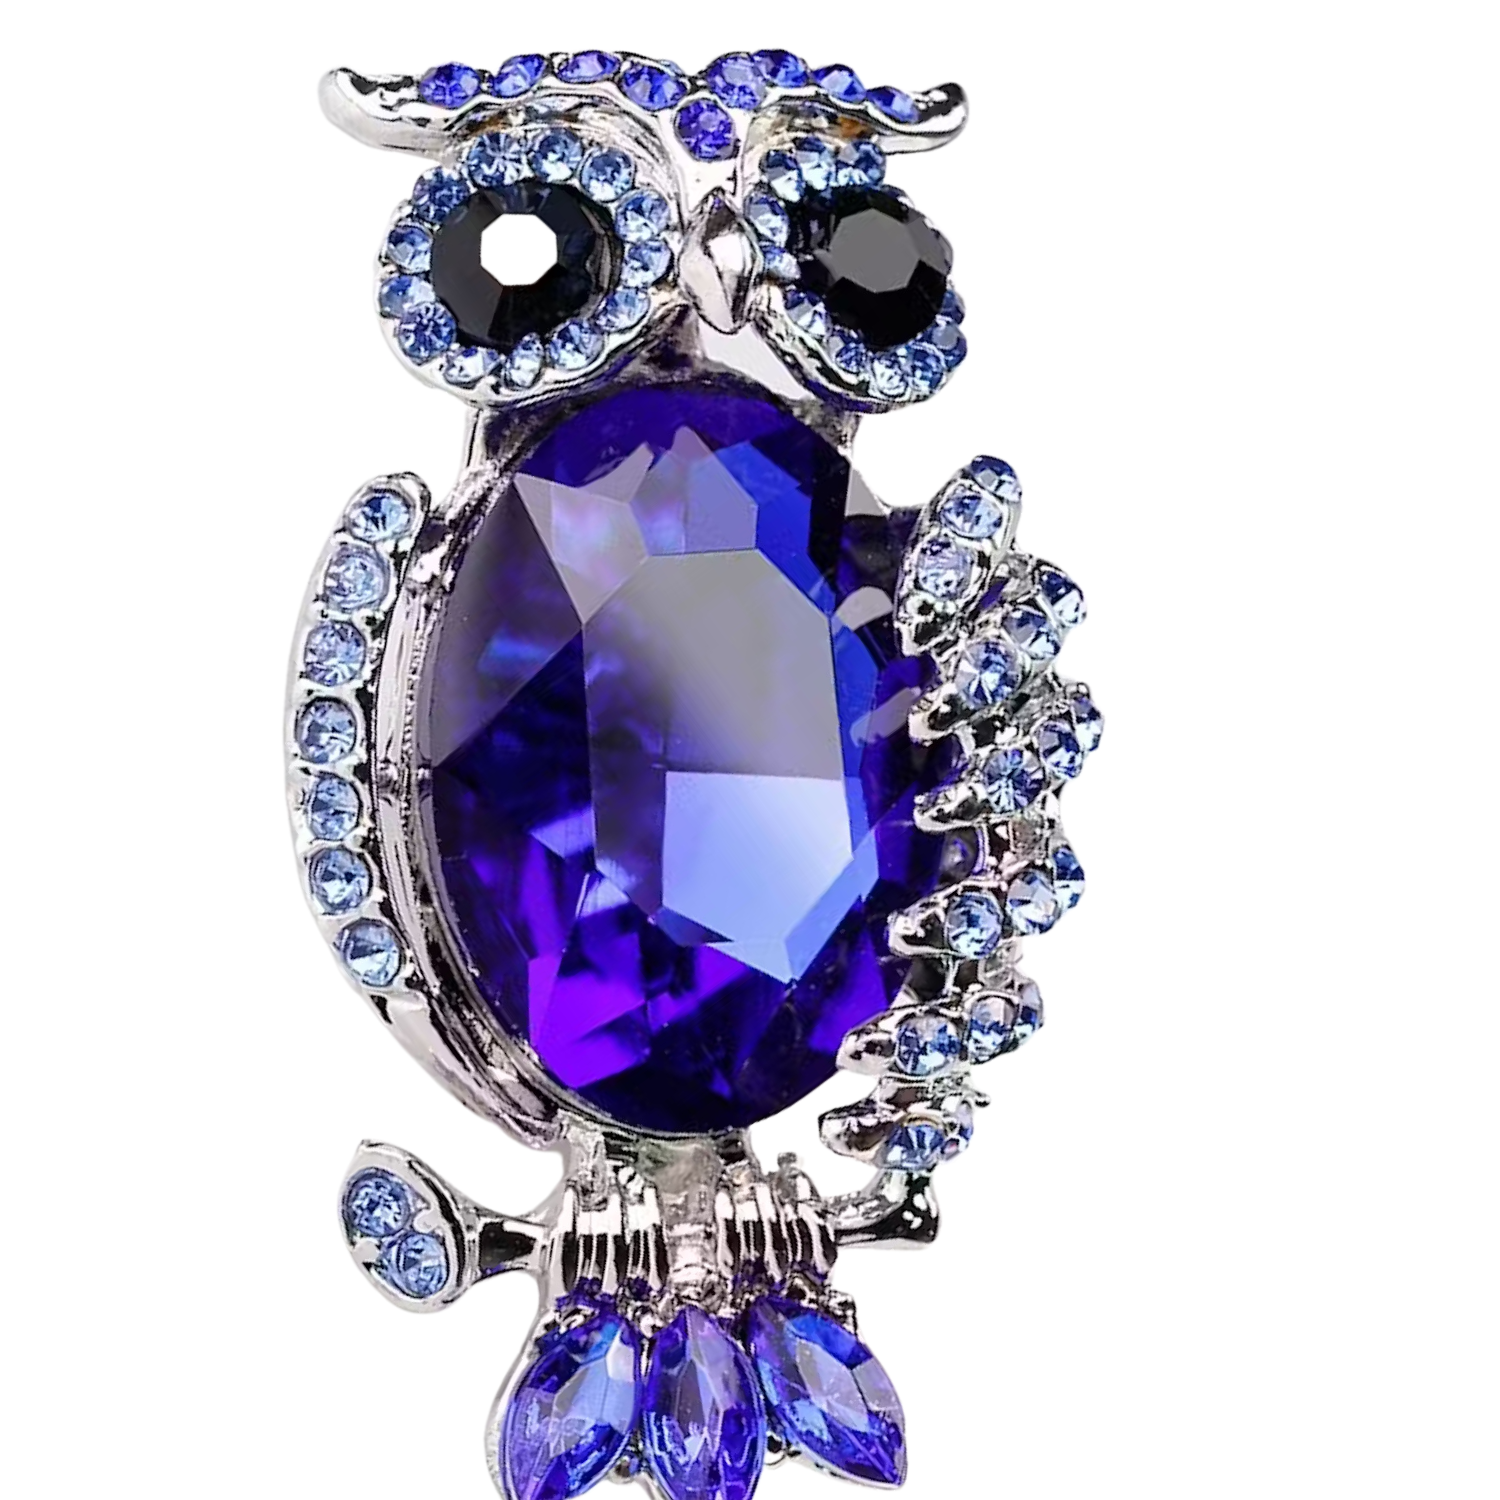 View 2: Purple and Blue with Chrome Owl Lapel Pin